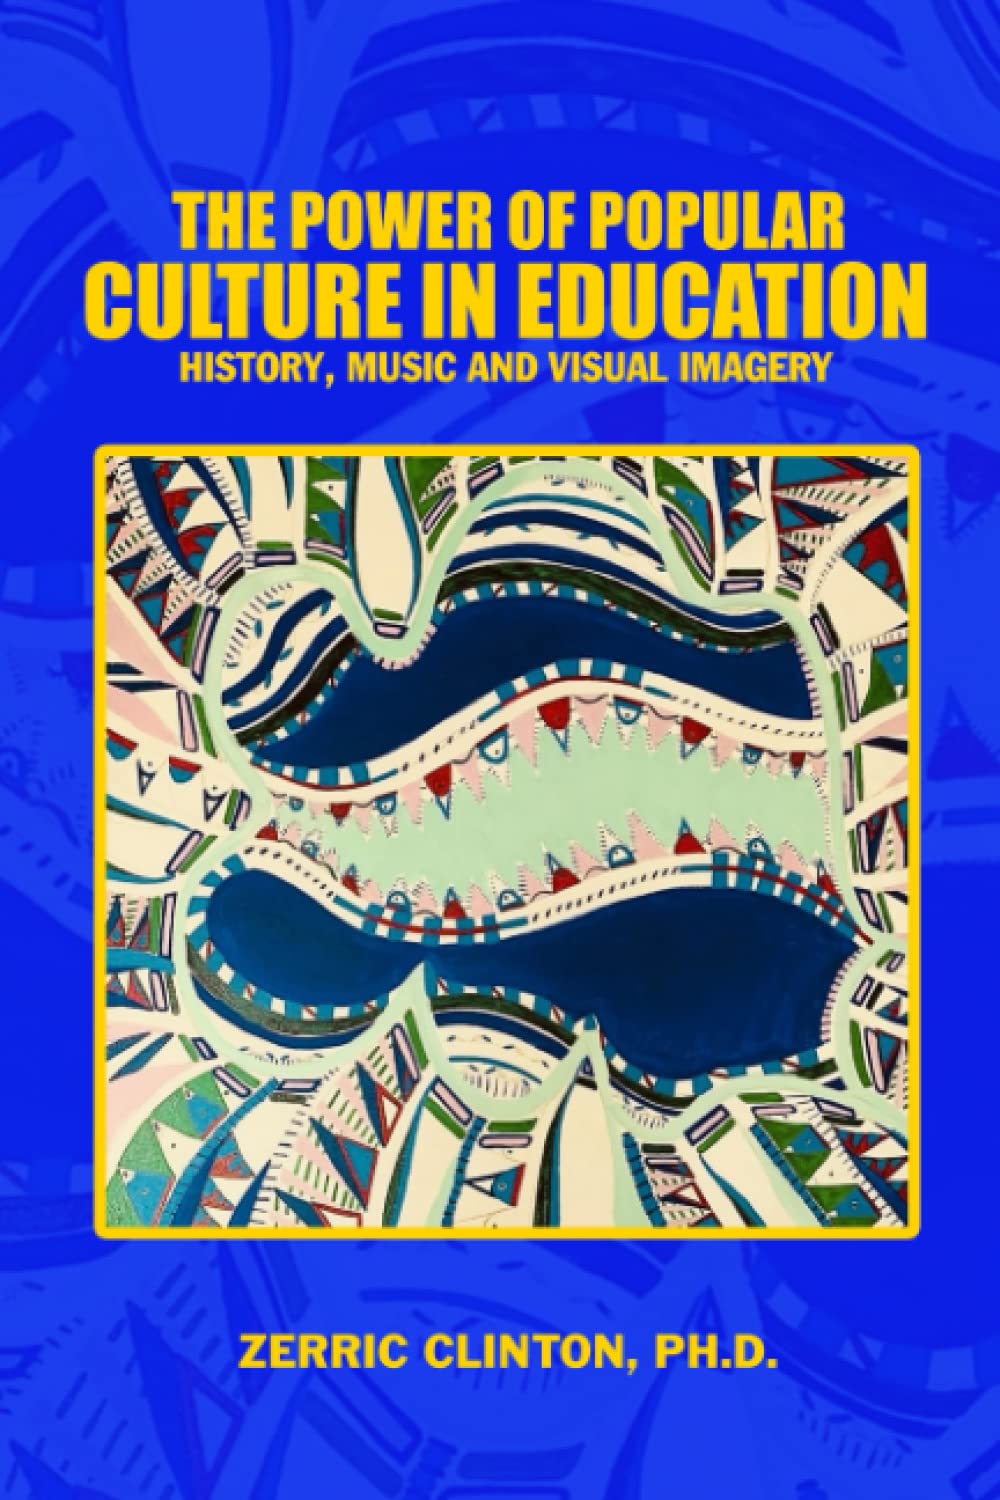 The Power of Popular Culture in Education: History, Music and Visual Imagery